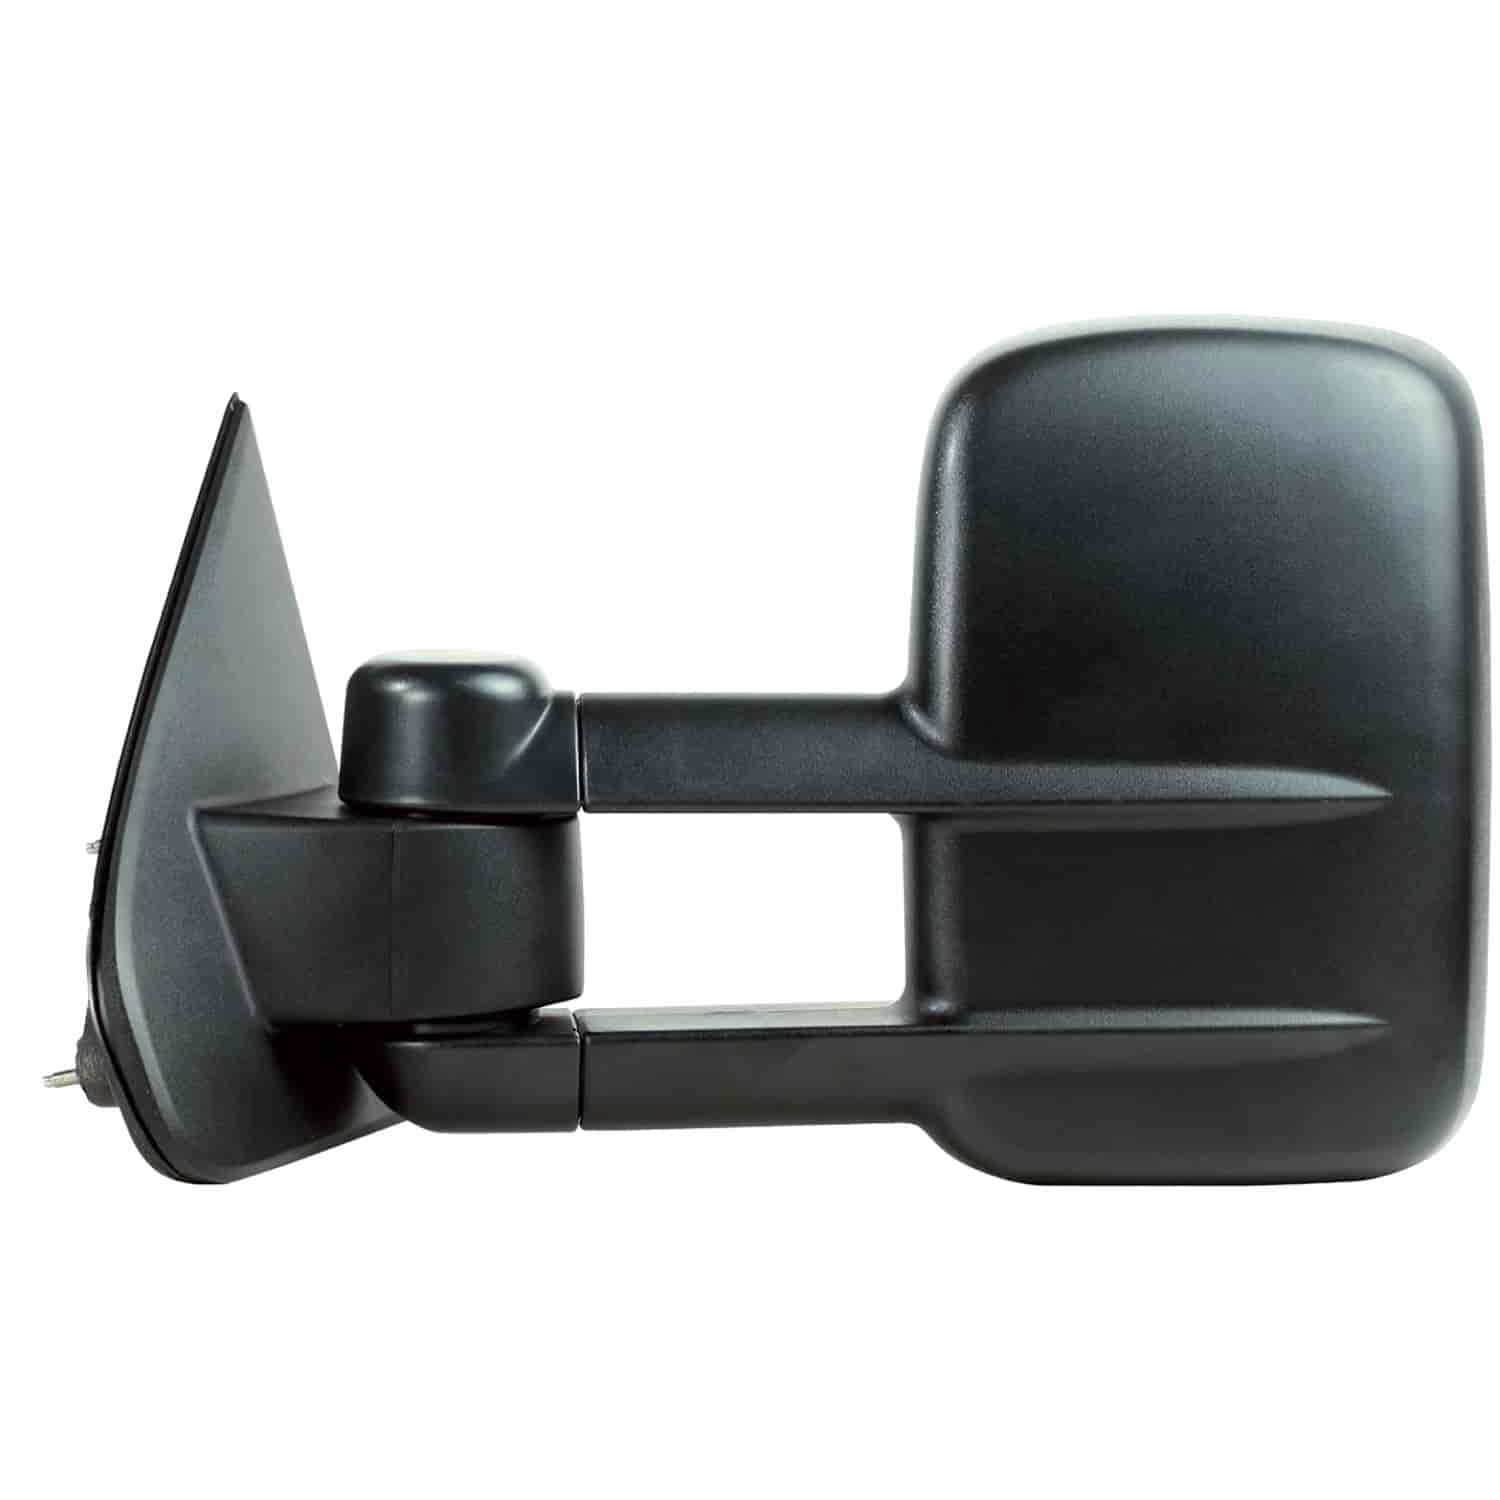 OEM Style Replacement mirror for 2014 Chevrolet Silverado Pick-Up 1500/ GMC Sierra Pick-Up 1500 exte